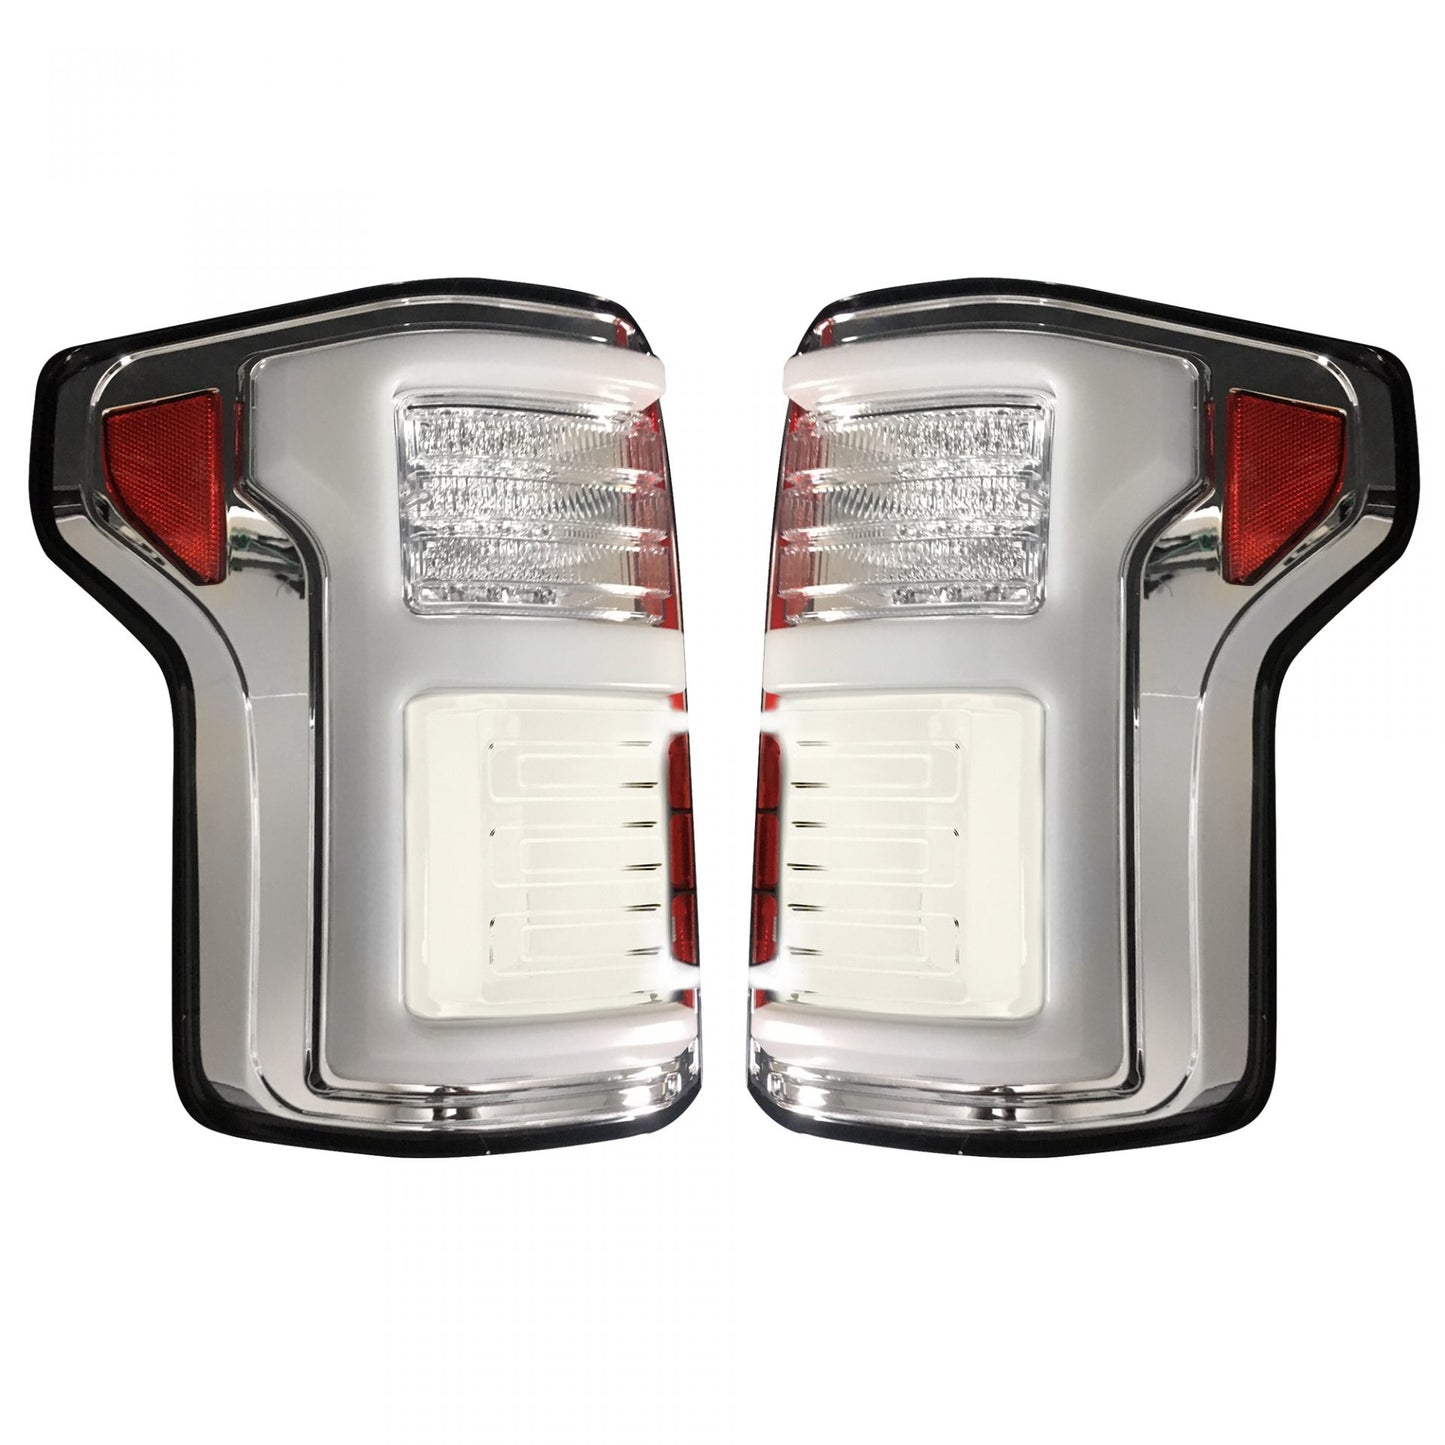 Ford F150 2015-2017 & RAPTOR 2017-2019 (Replaces OEM LED Tail Lights w/ Blind Spot Warning System) OLED TAIL LIGHTS